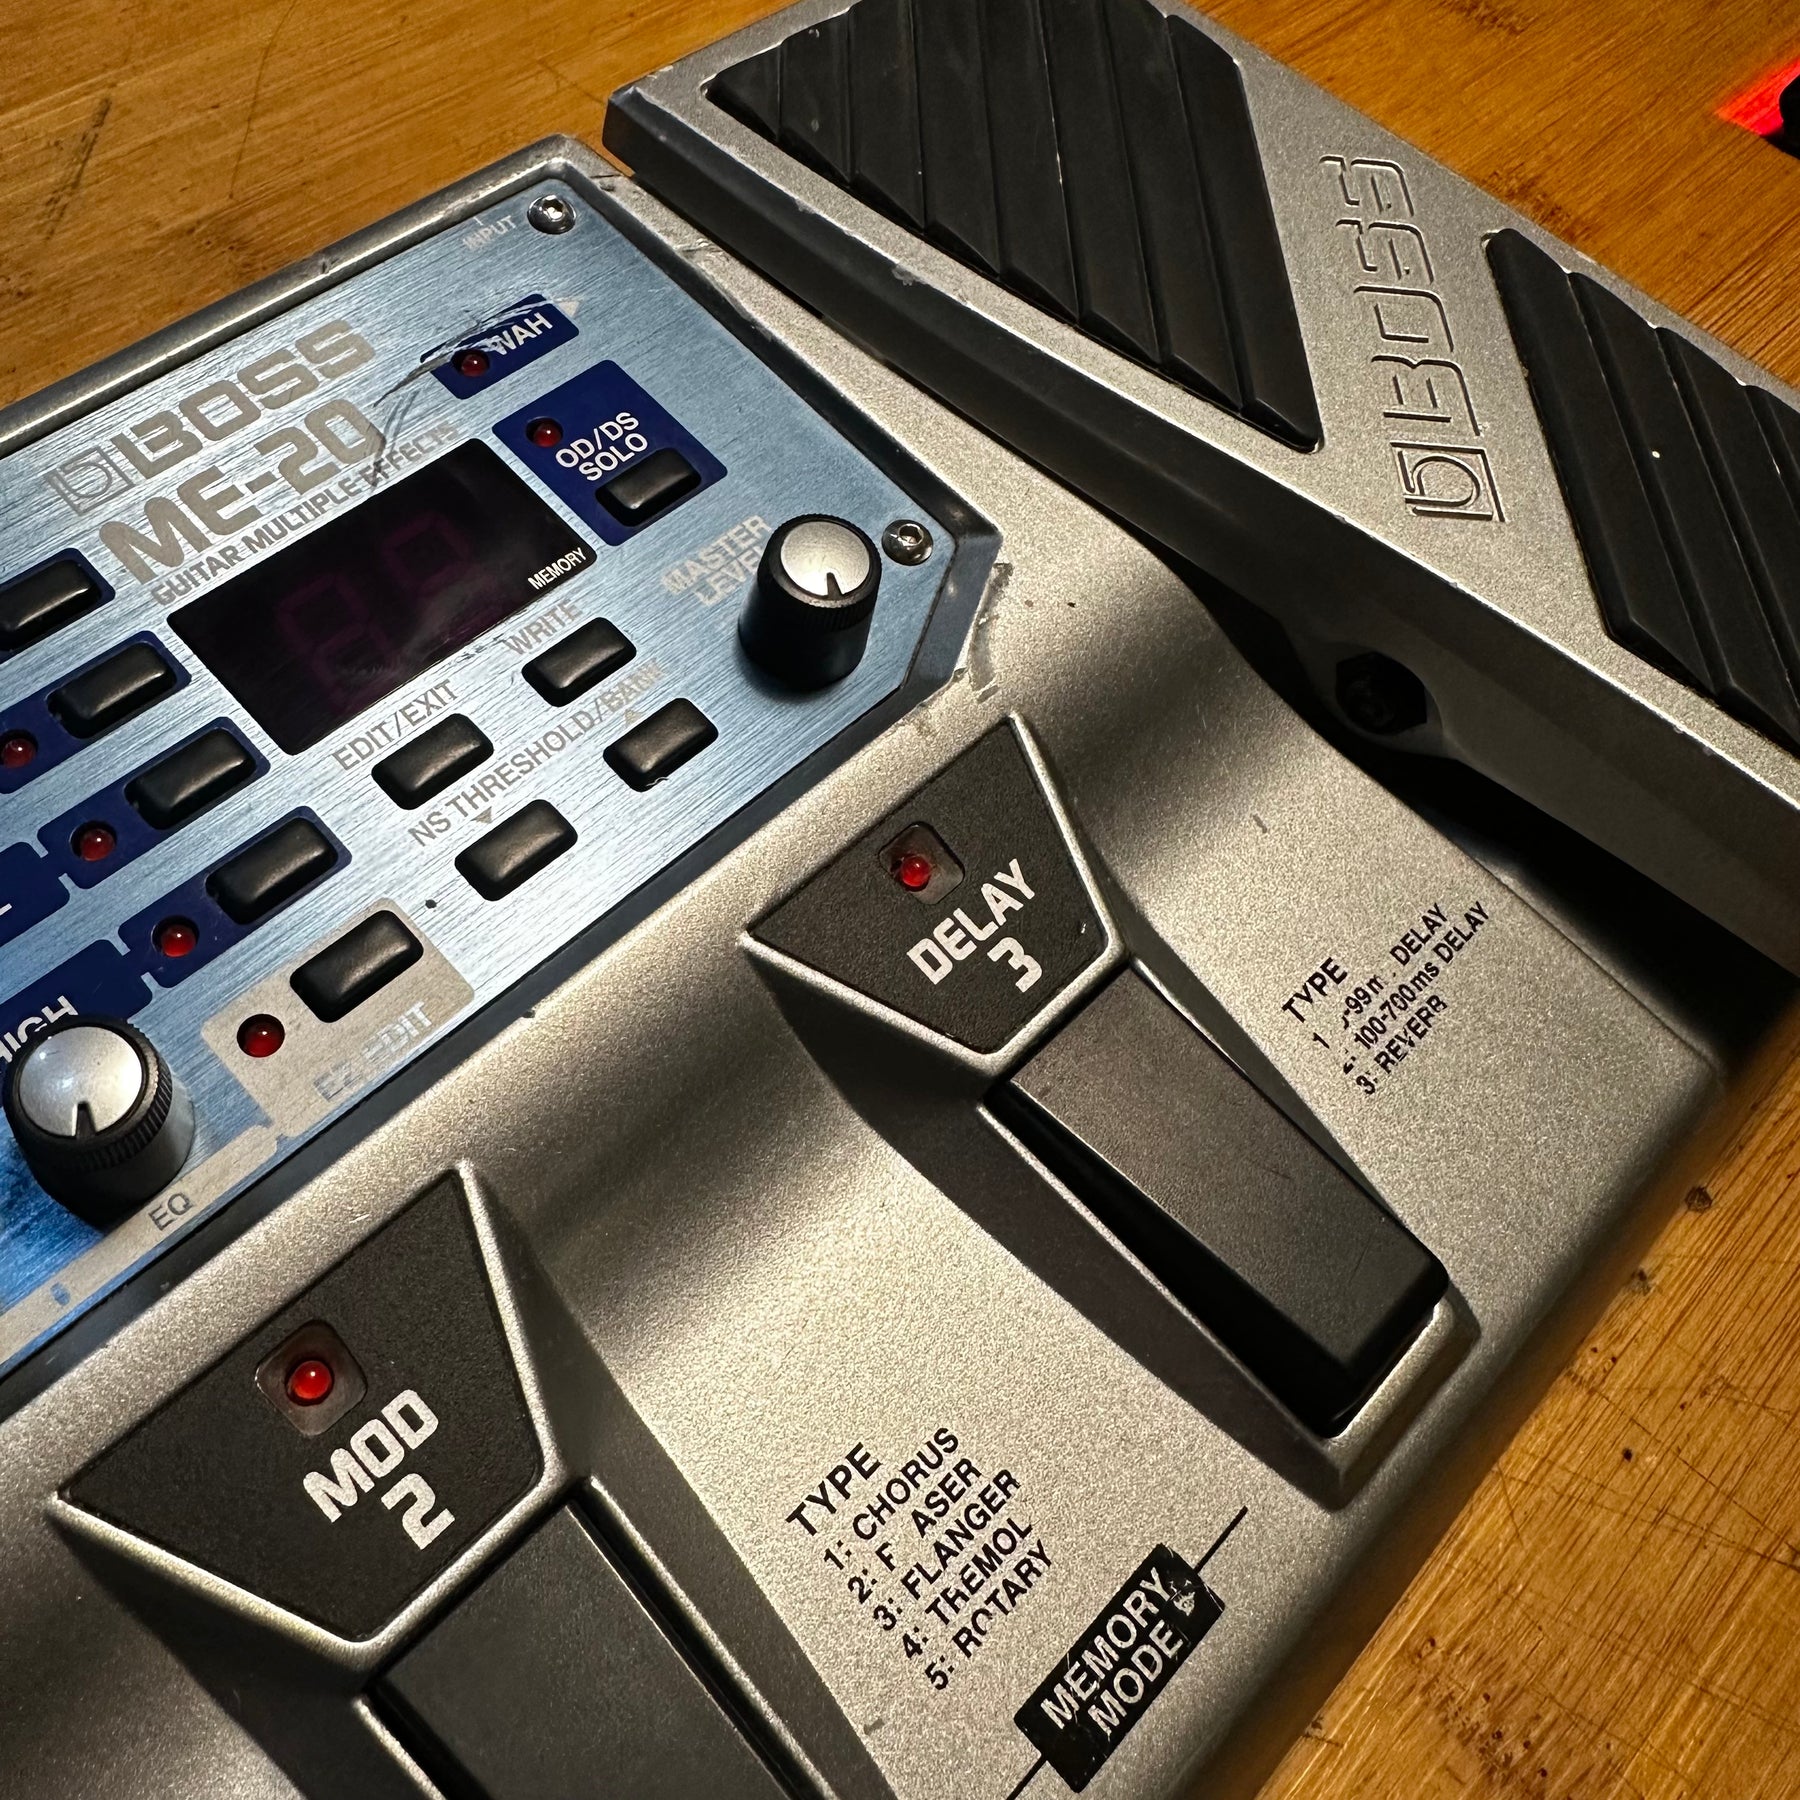 Boss ME-20 Multi Effects Pedal - Preowend